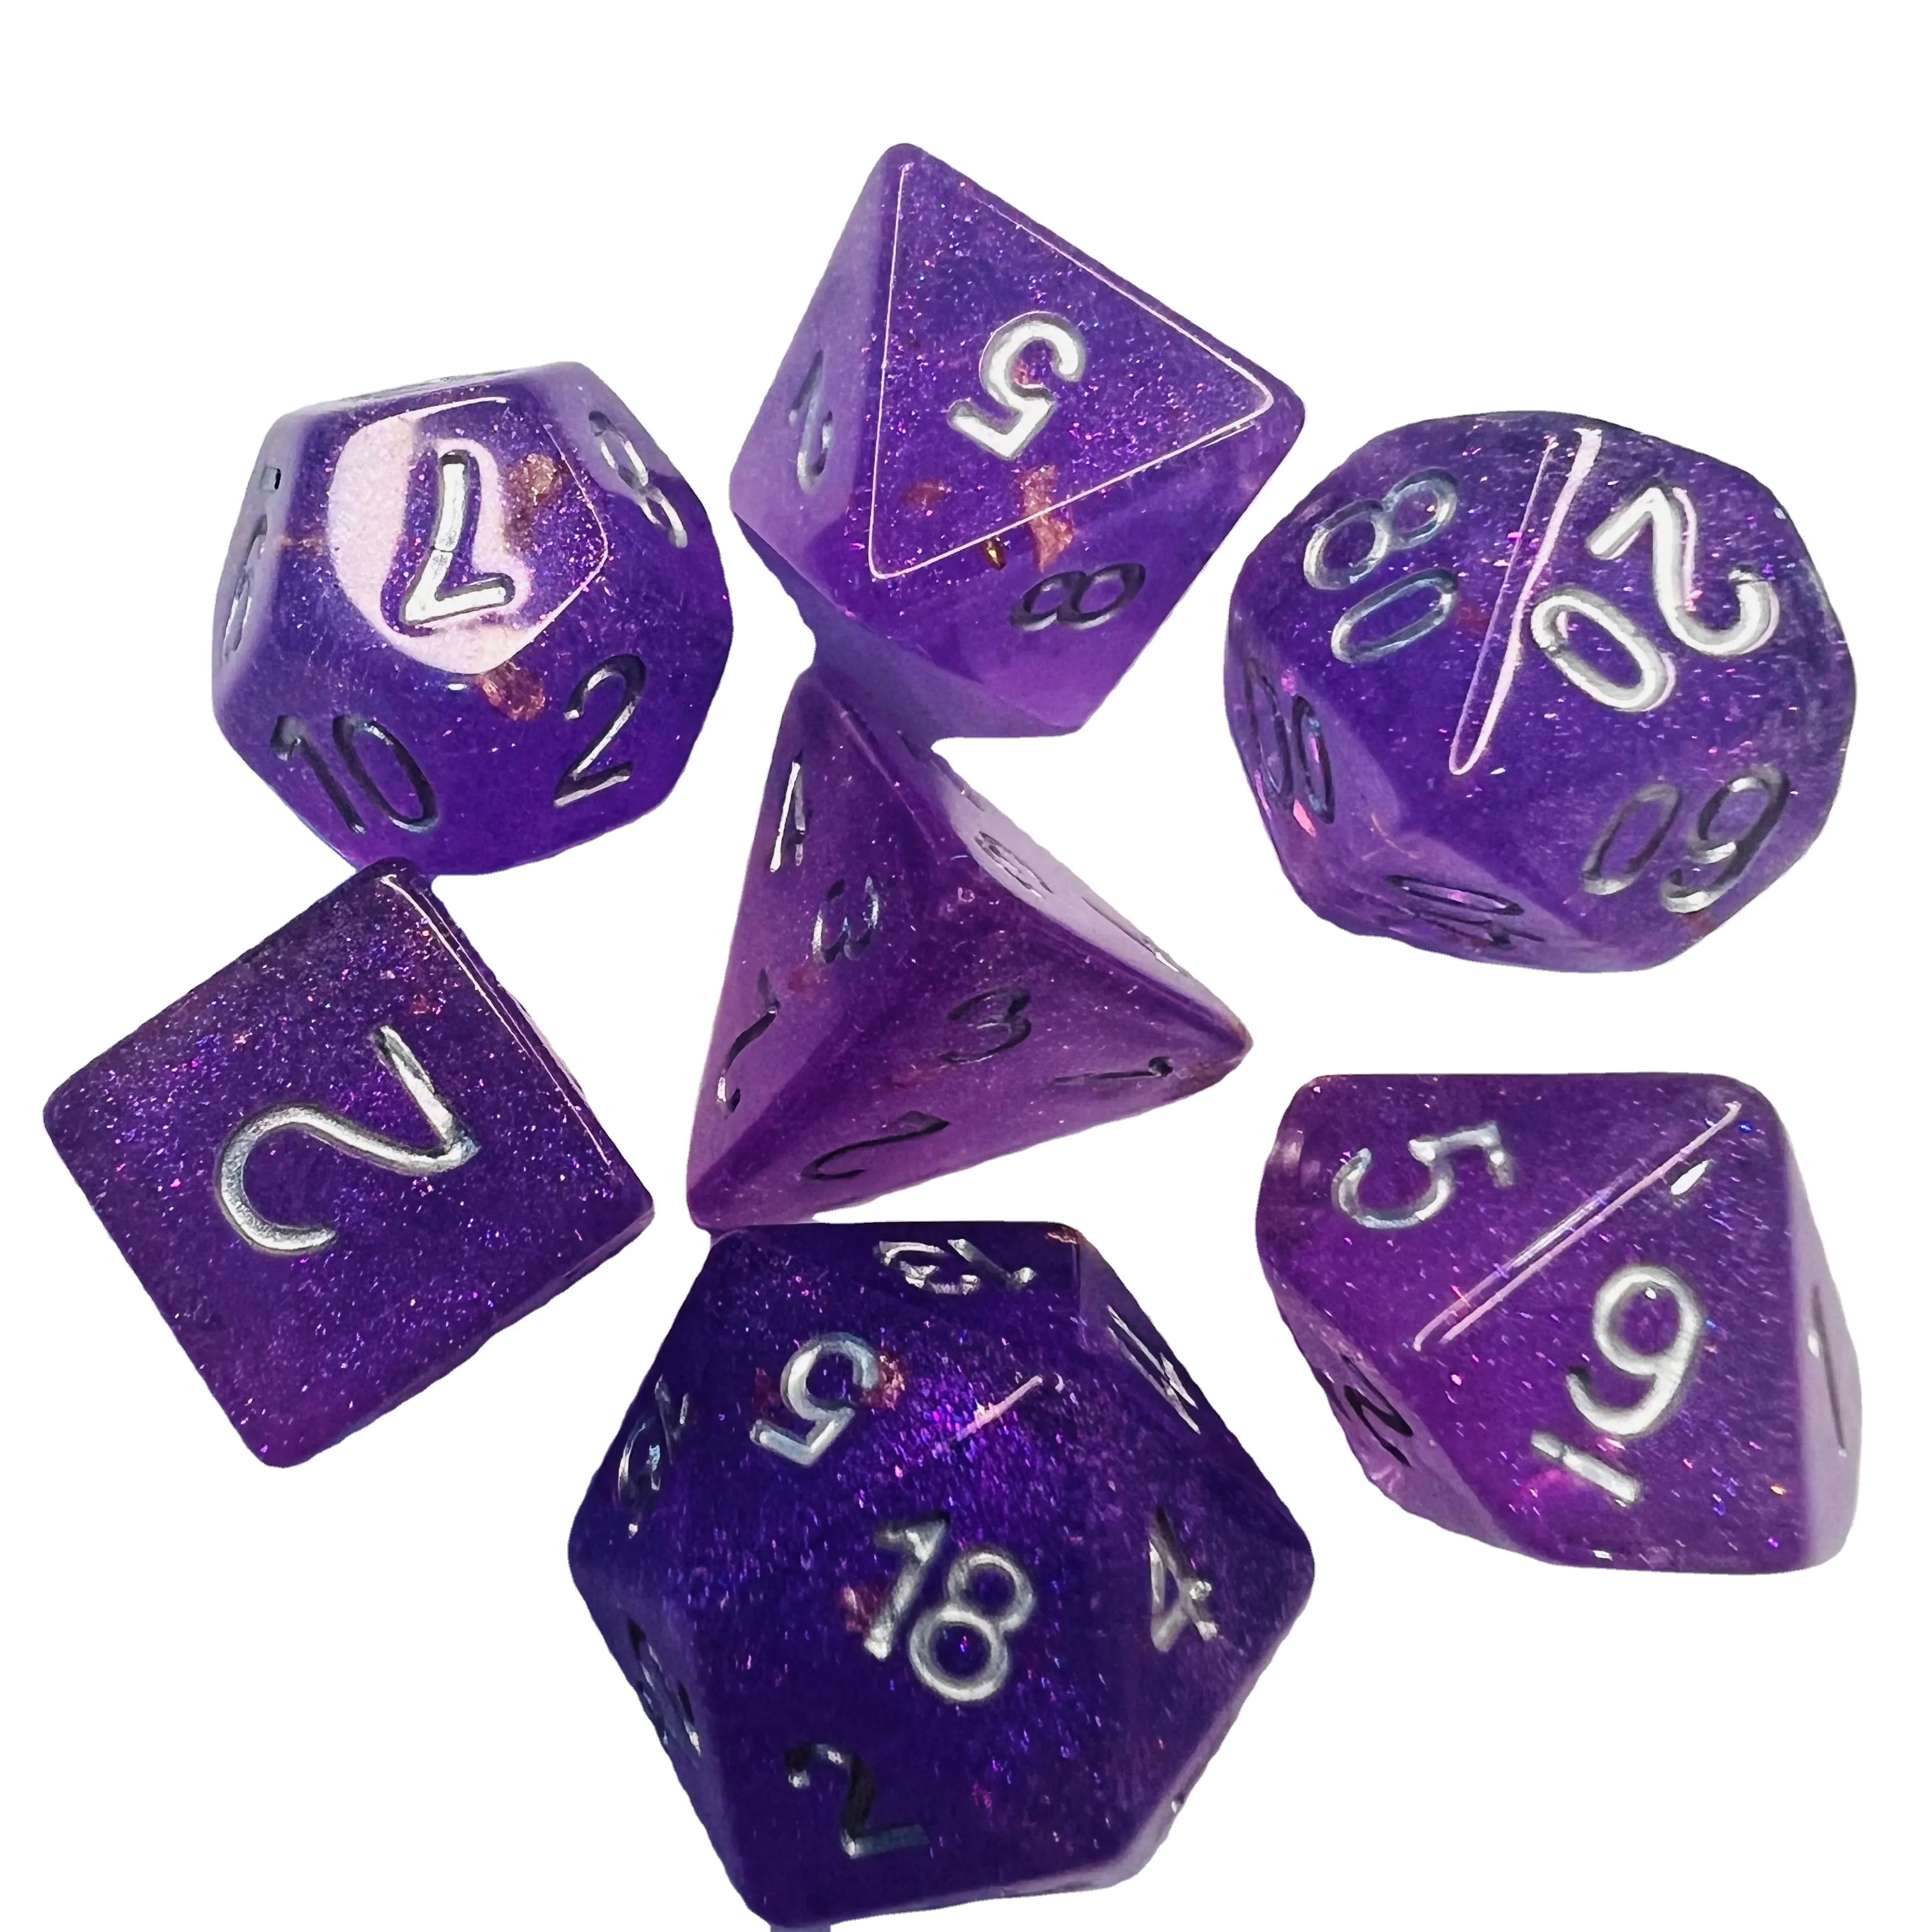 7-Piece Set Of Purple Polyhedral Dice Transparent Plastic Square Corner Game Dice For D&D Rpg For Tabletop Gaming